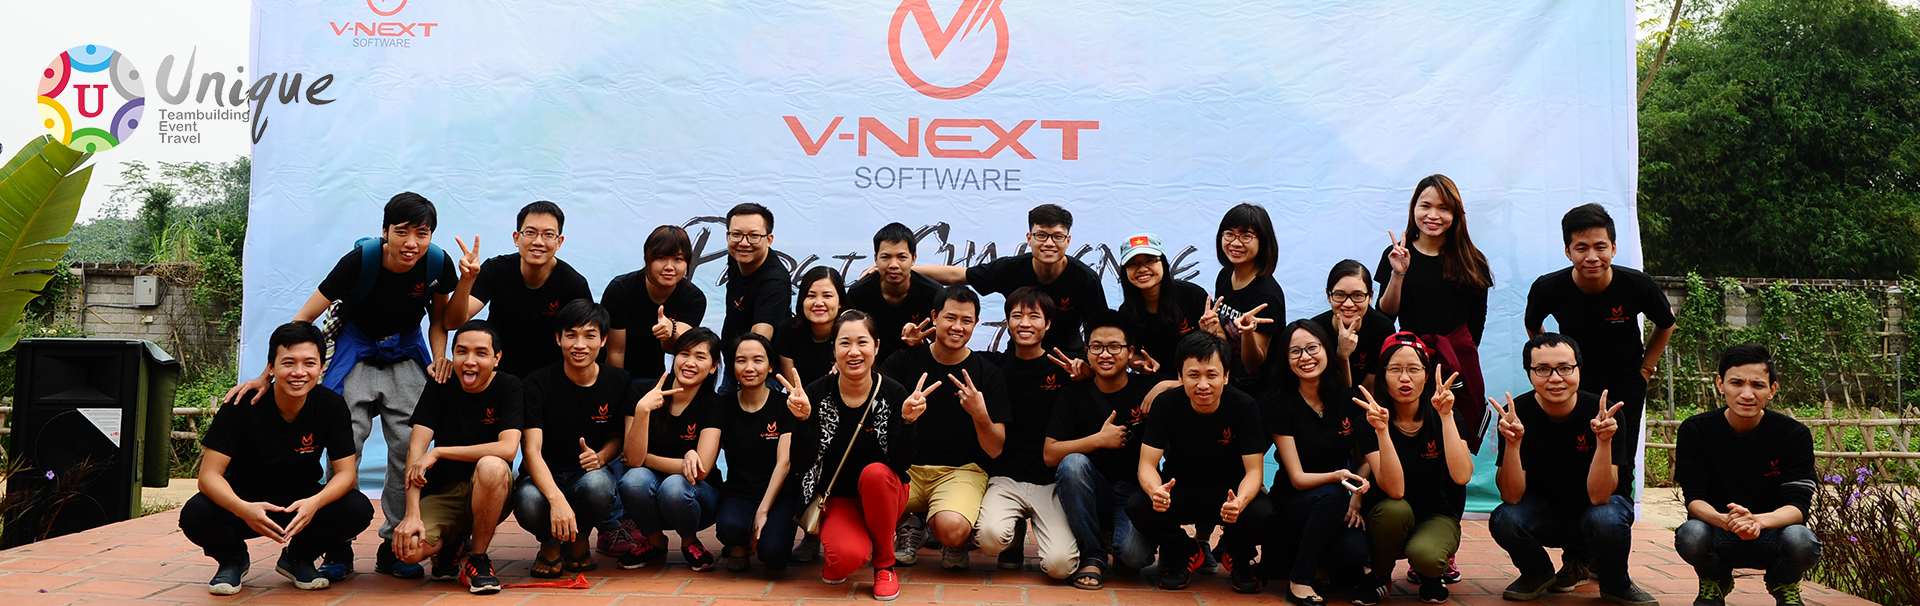 VNEXT SOFTWARE: DARE TO CHALLENG - DARE TO WIN